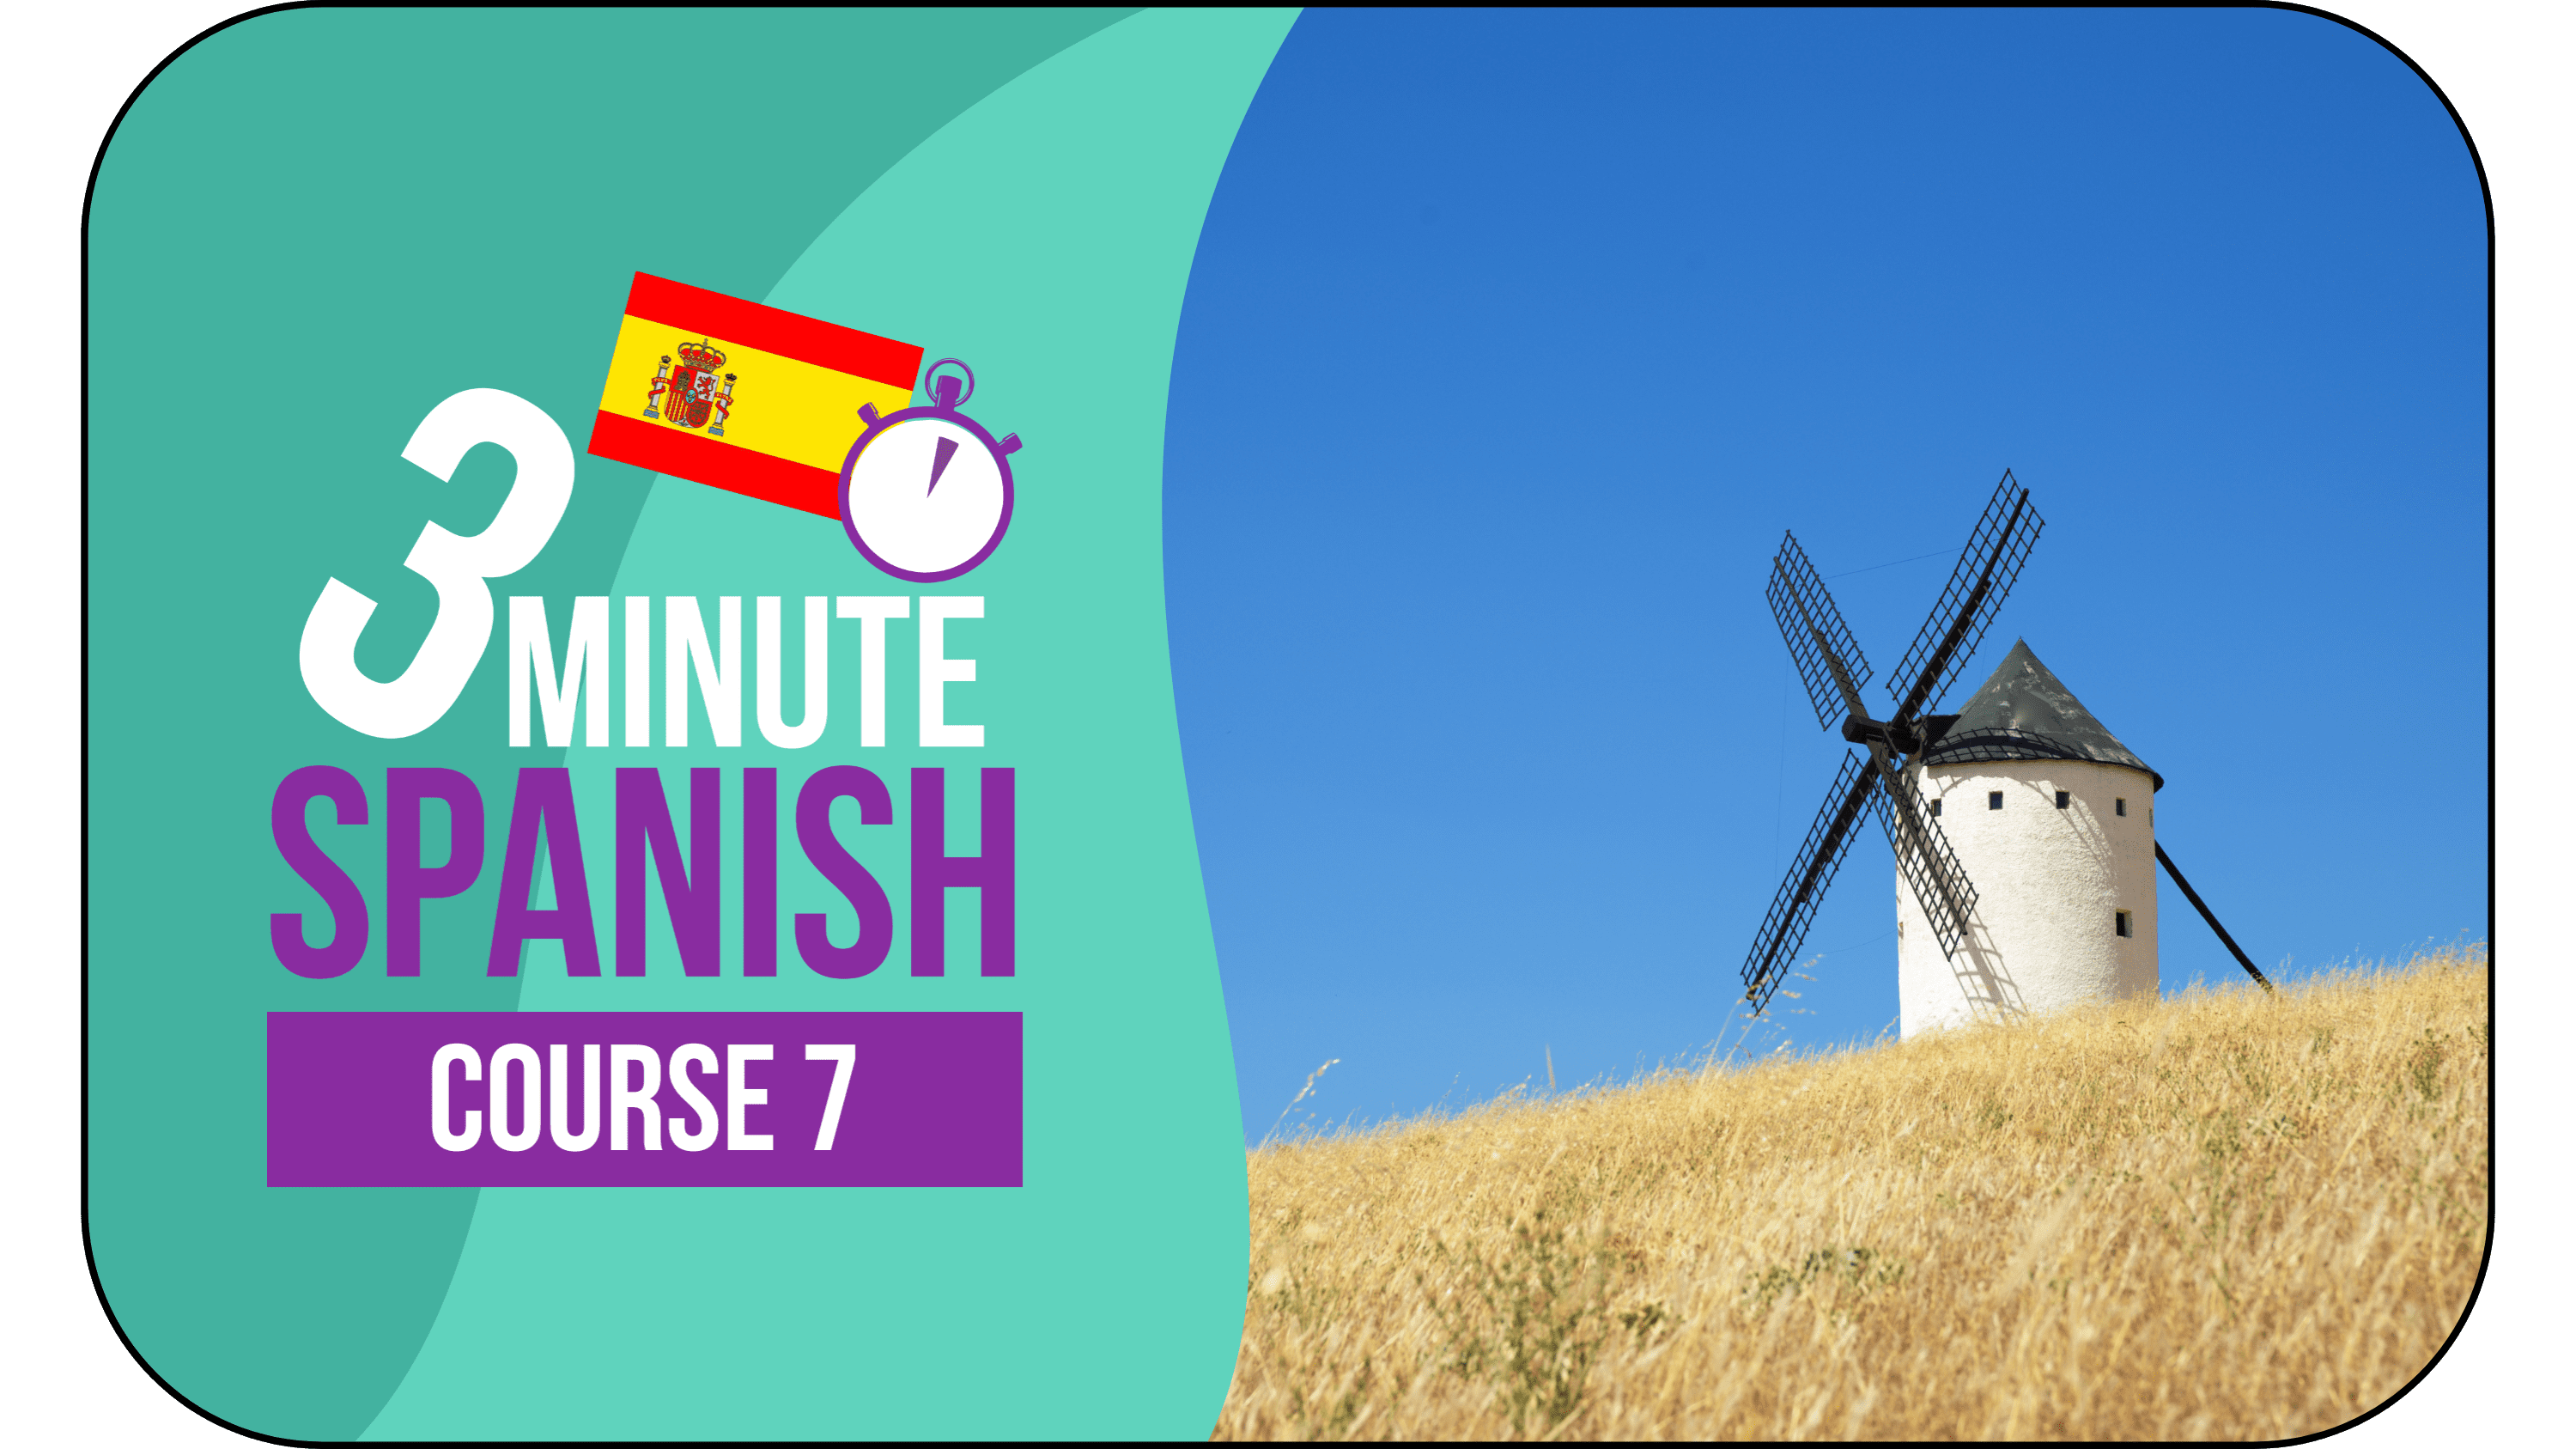 3 Minute Spanish - Course 7